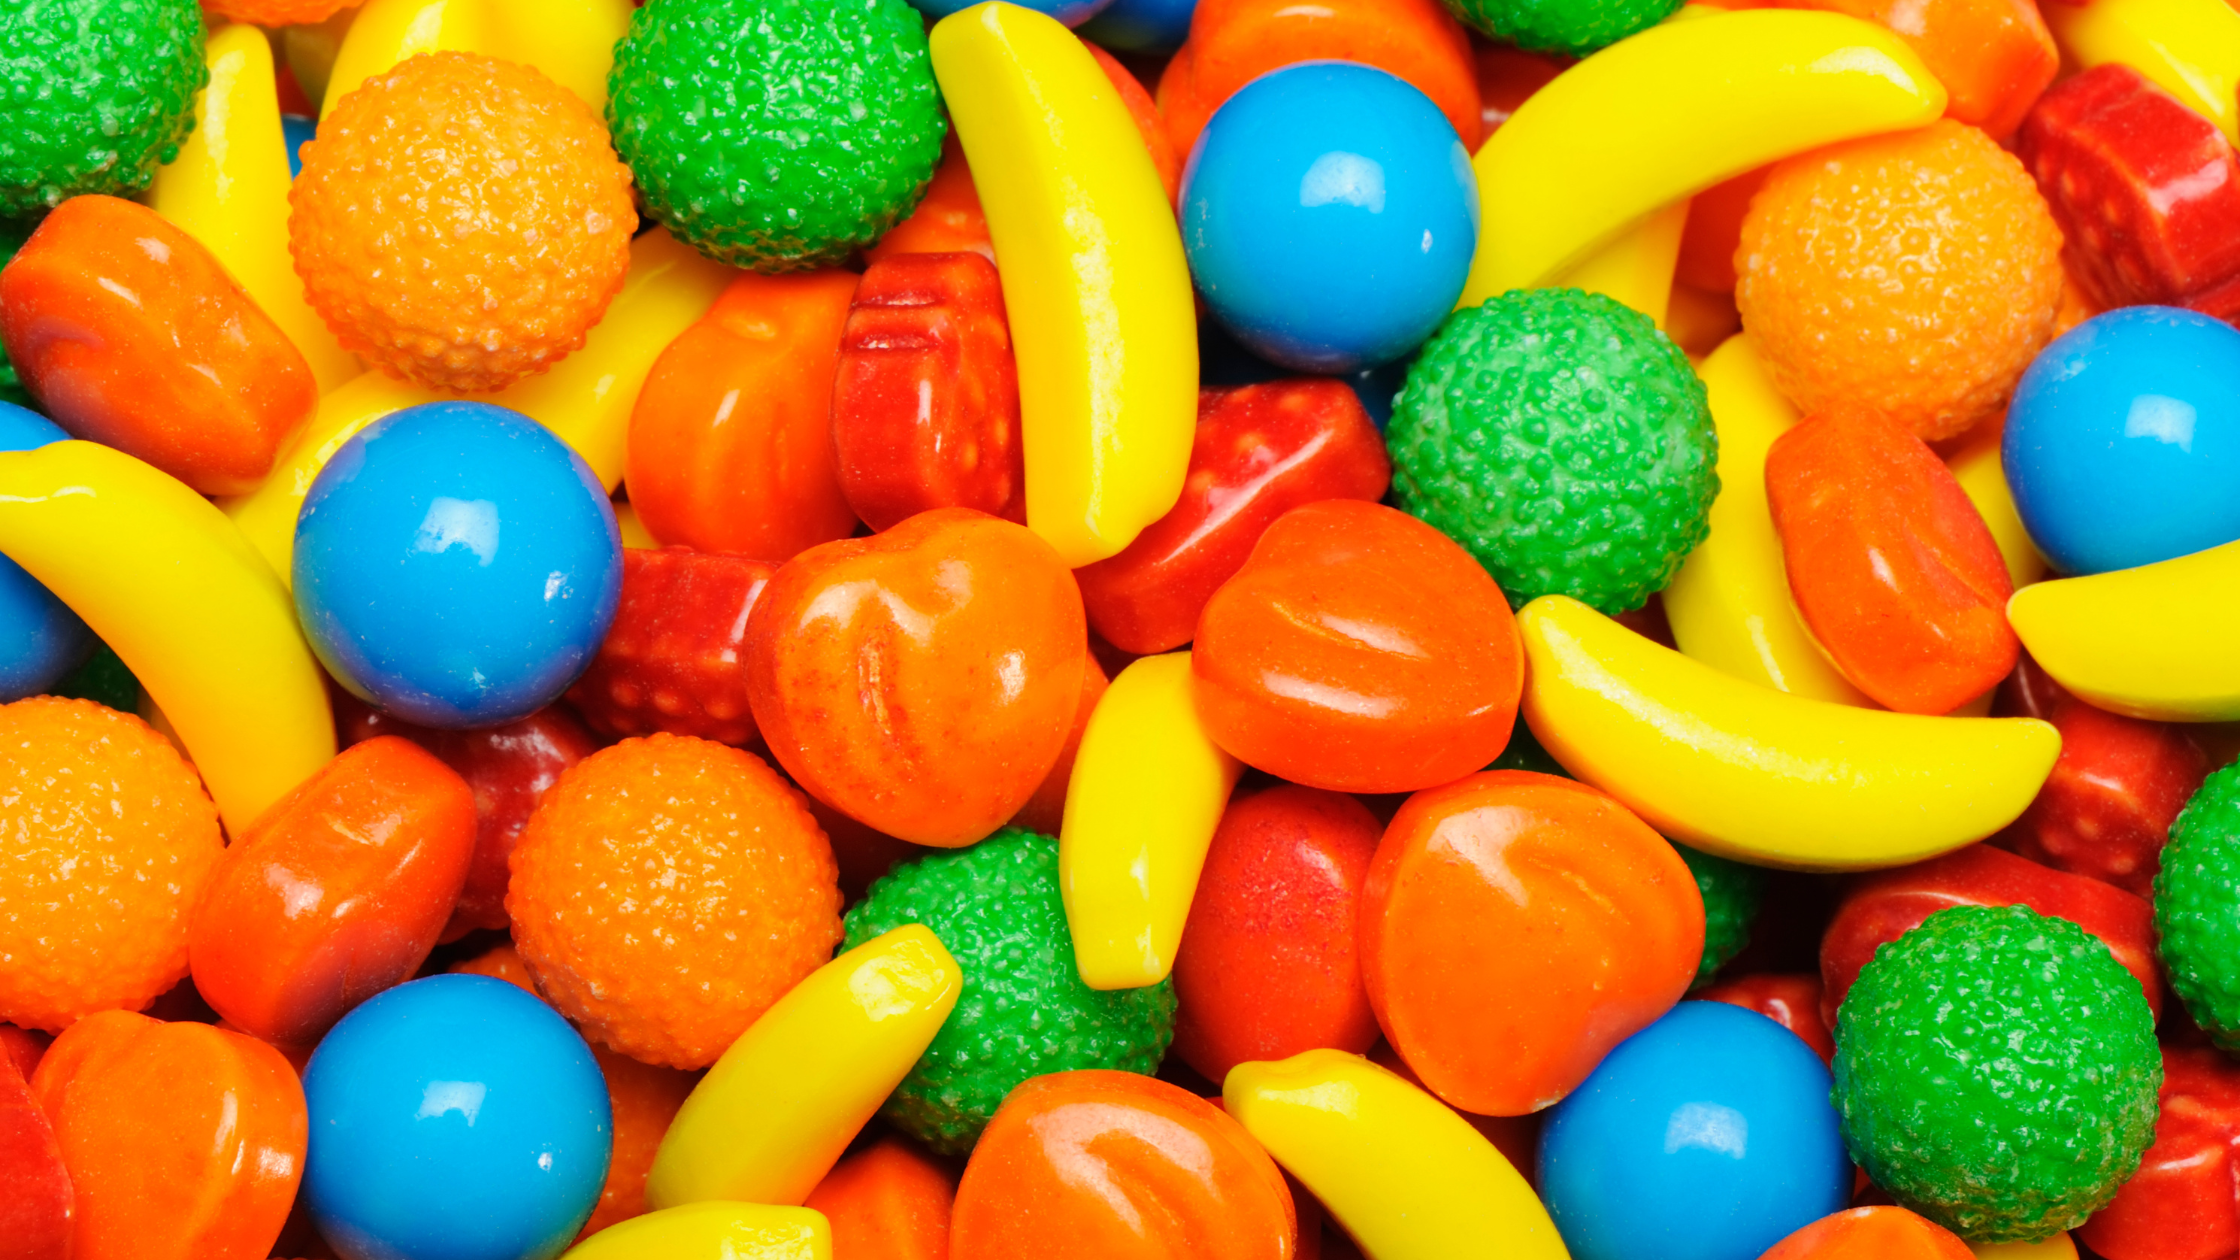 Discover all fruit candy flavors, types, and brands at Candy Retailer